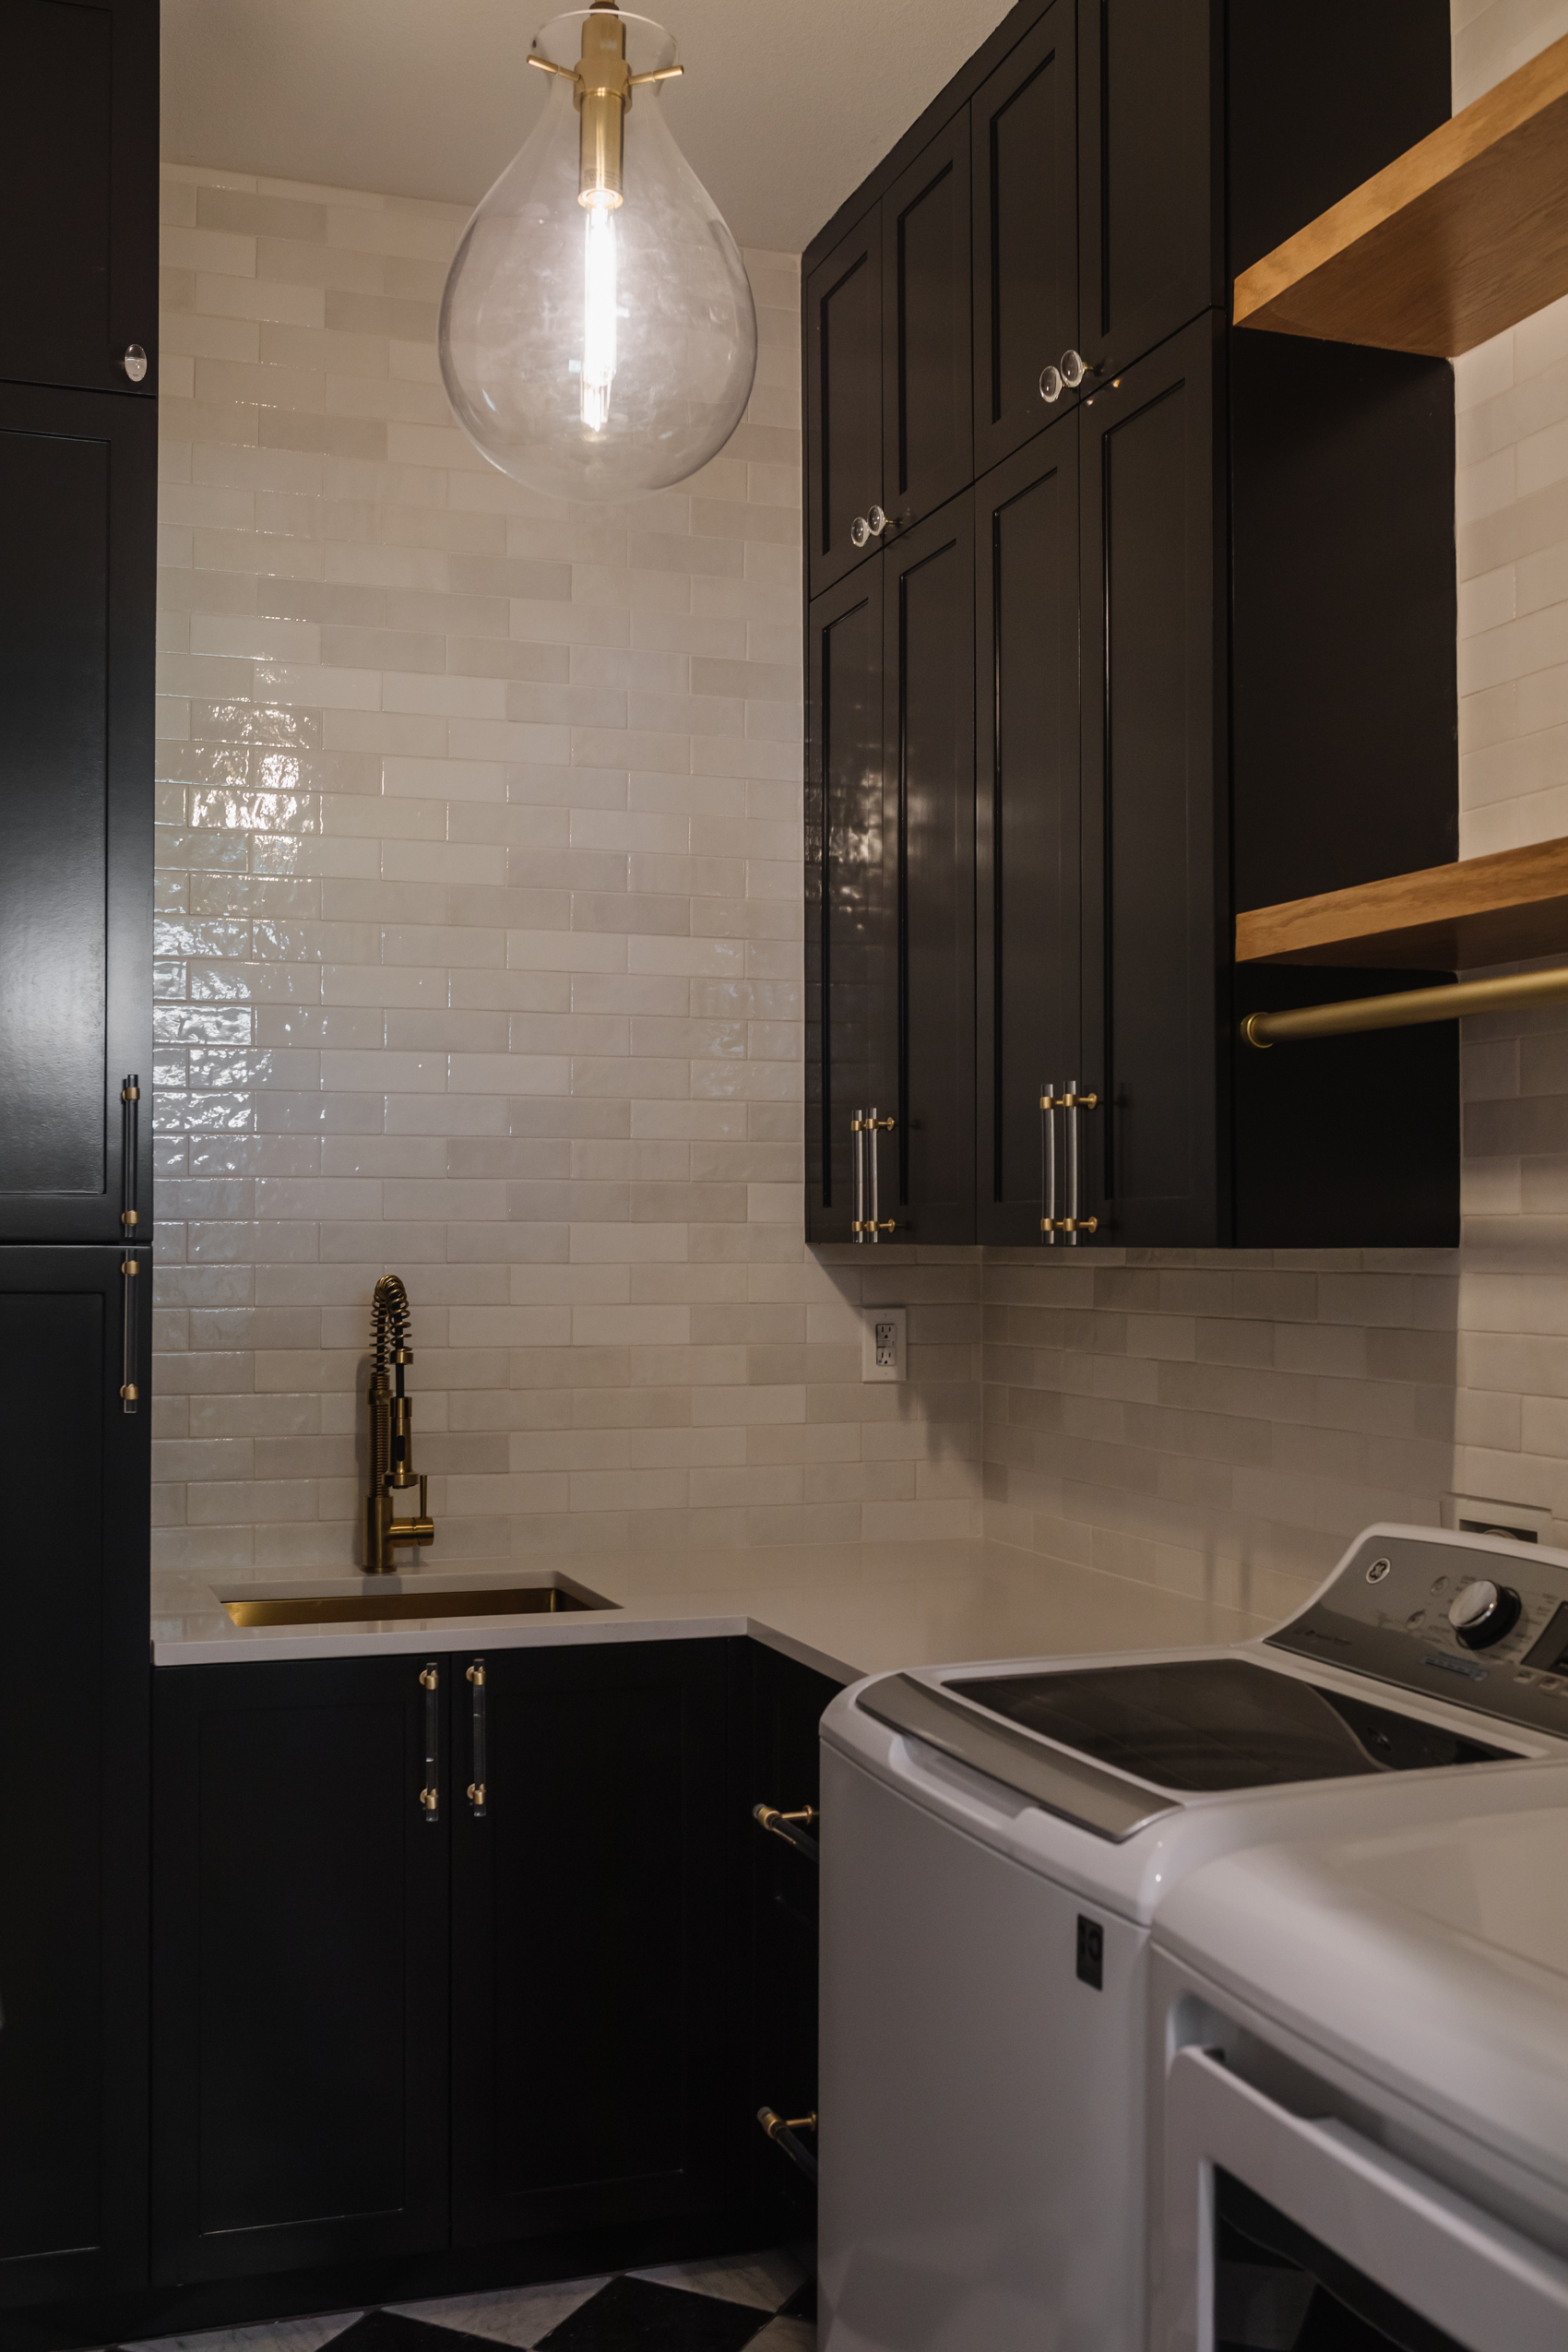 Alexander James Tile Studio Handcraft white subway tile backsplash with cabinets painted Sherwin Williams Tricorn Black with a Hudson Valley Ivy Pendant